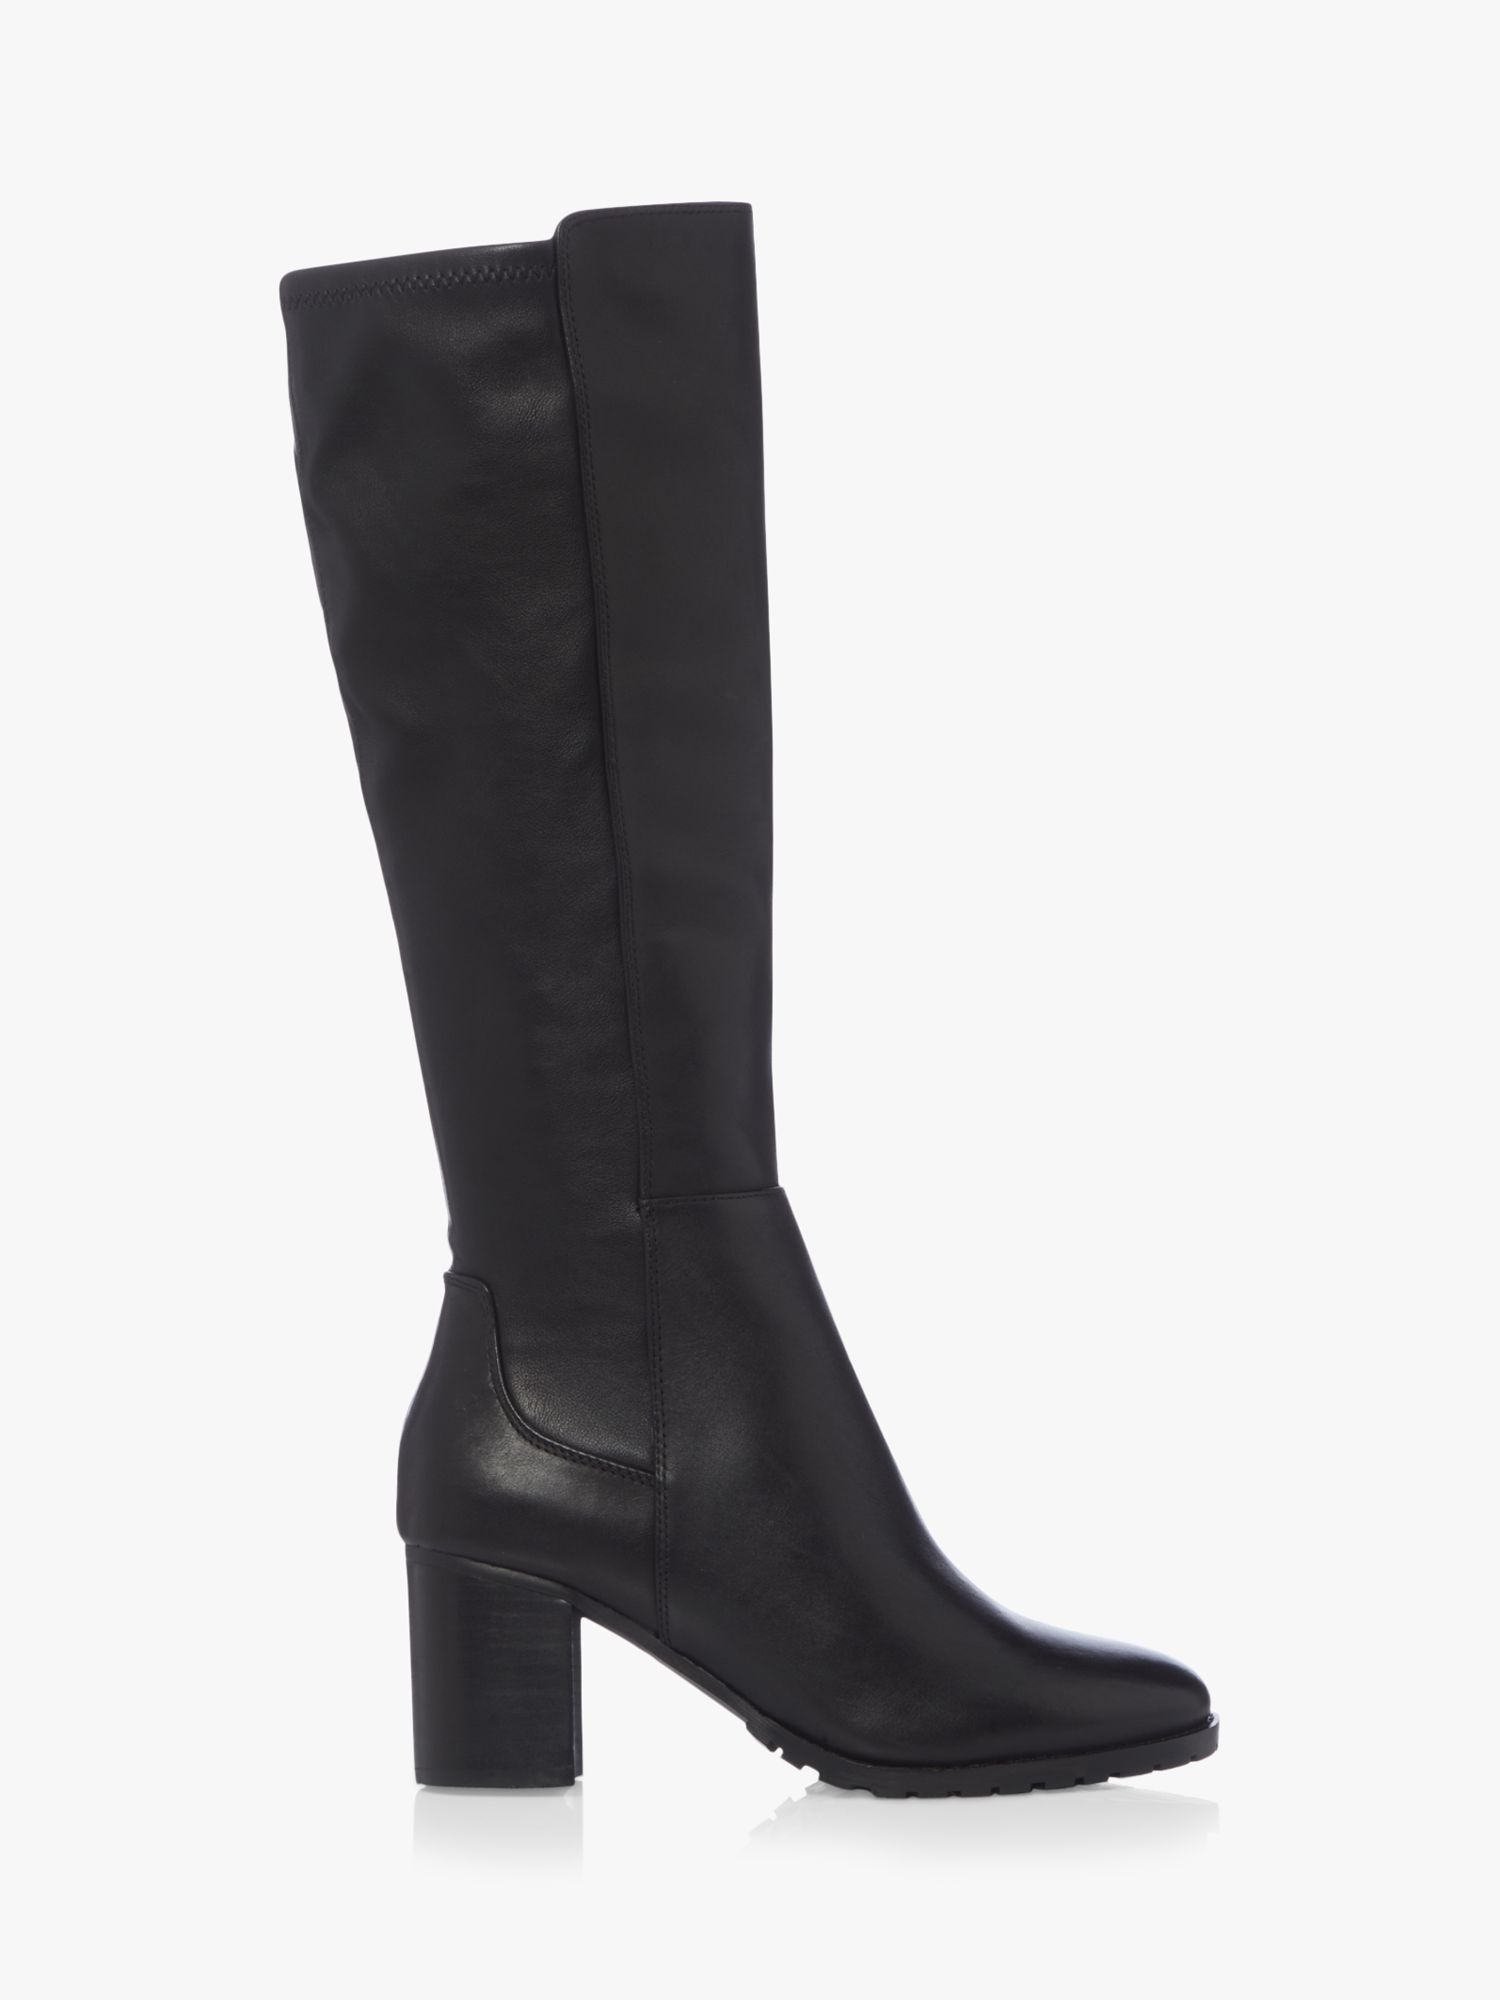 Dune Titain Leather Stretch Cleated Knee High Block Heel Boots, Black ...